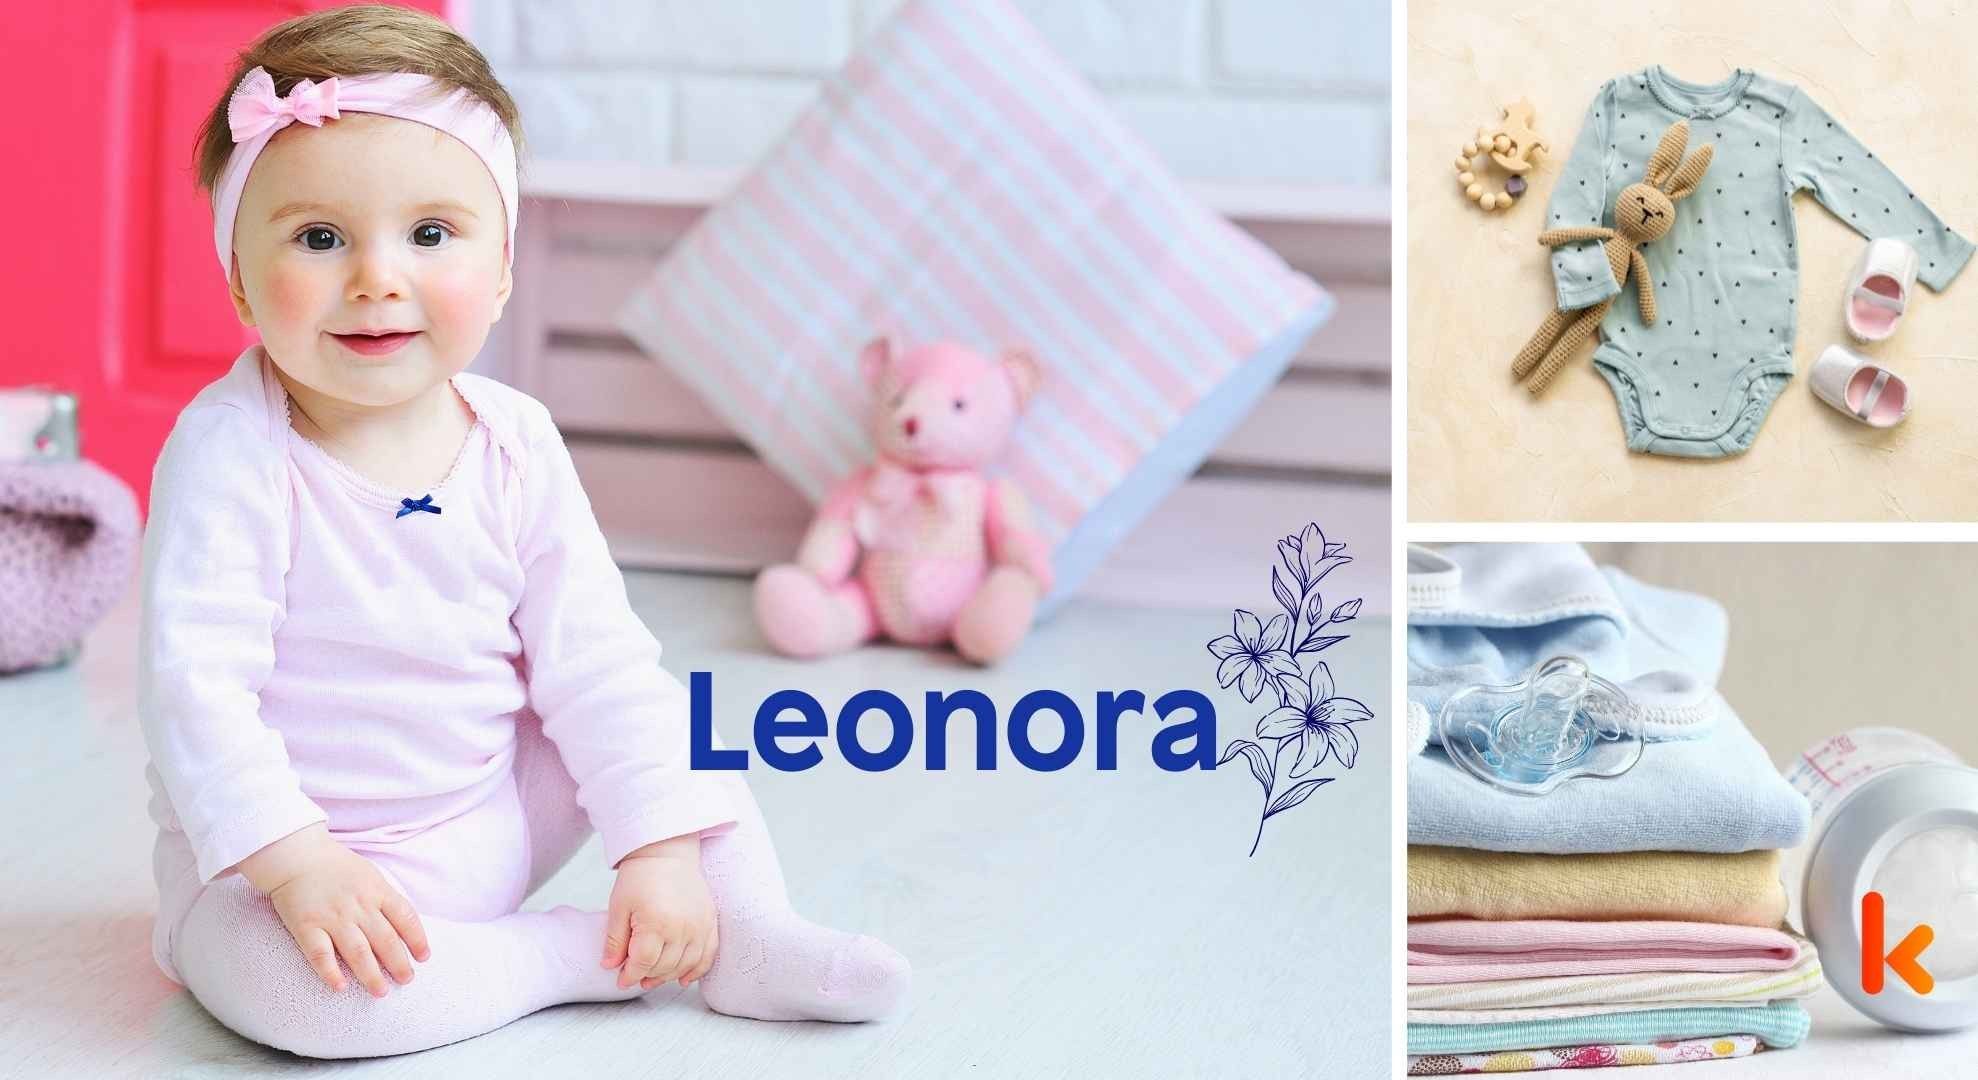 Meaning of the name Leonora